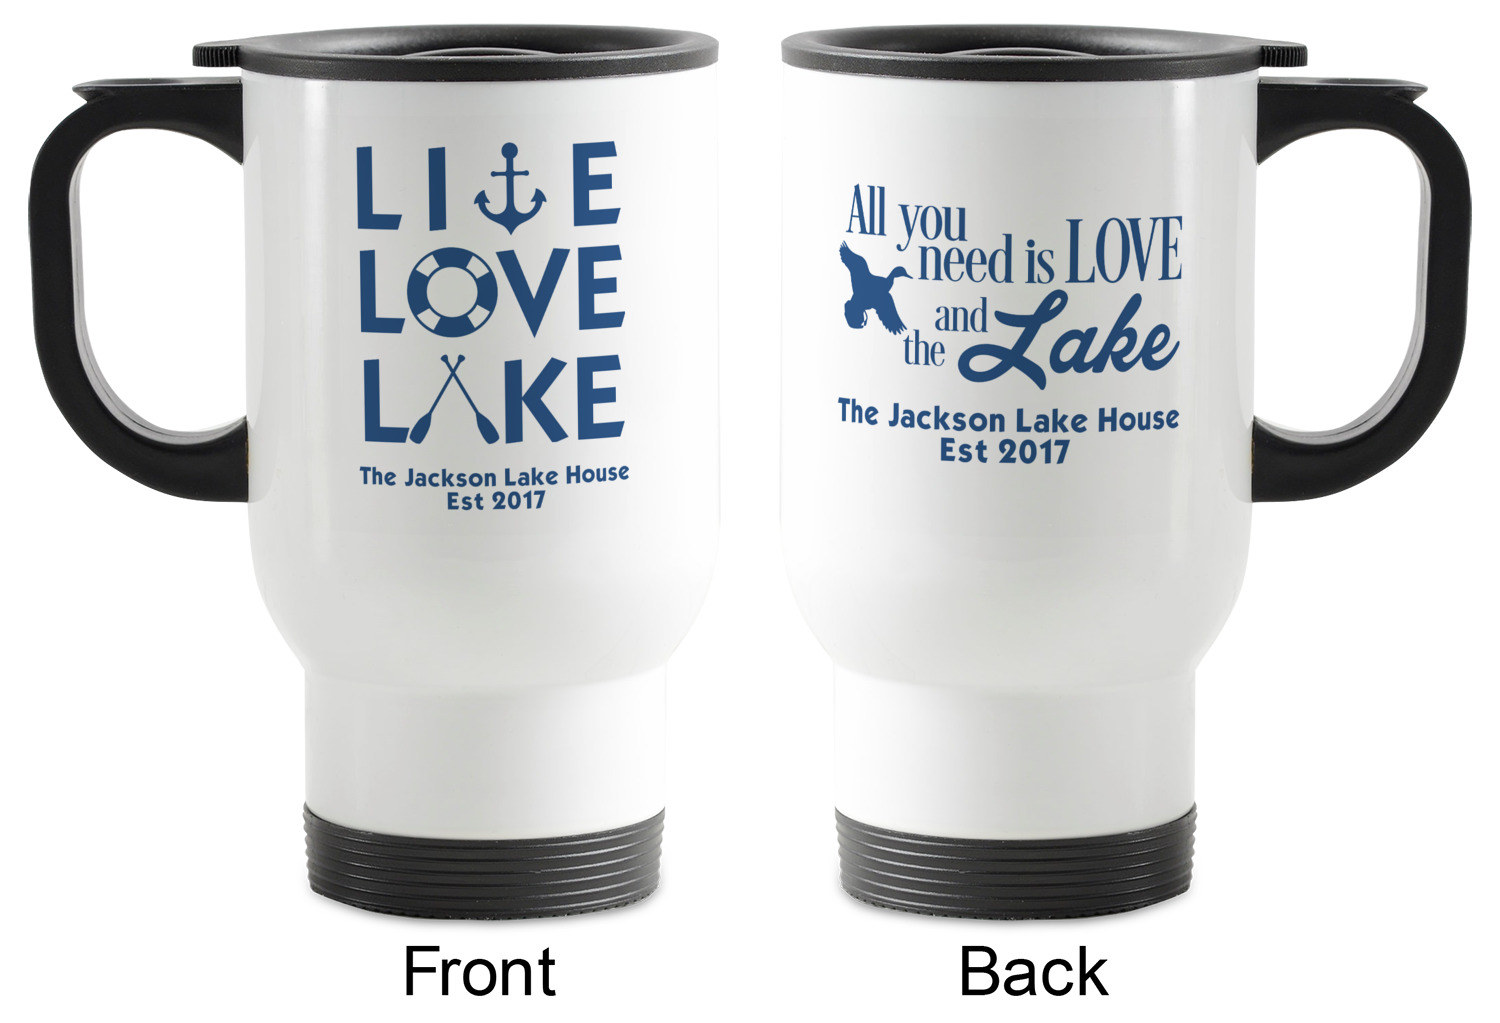 https://www.youcustomizeit.com/common/MAKE/1038239/Live-Love-Lake-Stainless-Steel-Travel-Mug-with-Handle-Apvl.jpg?lm=1670591614